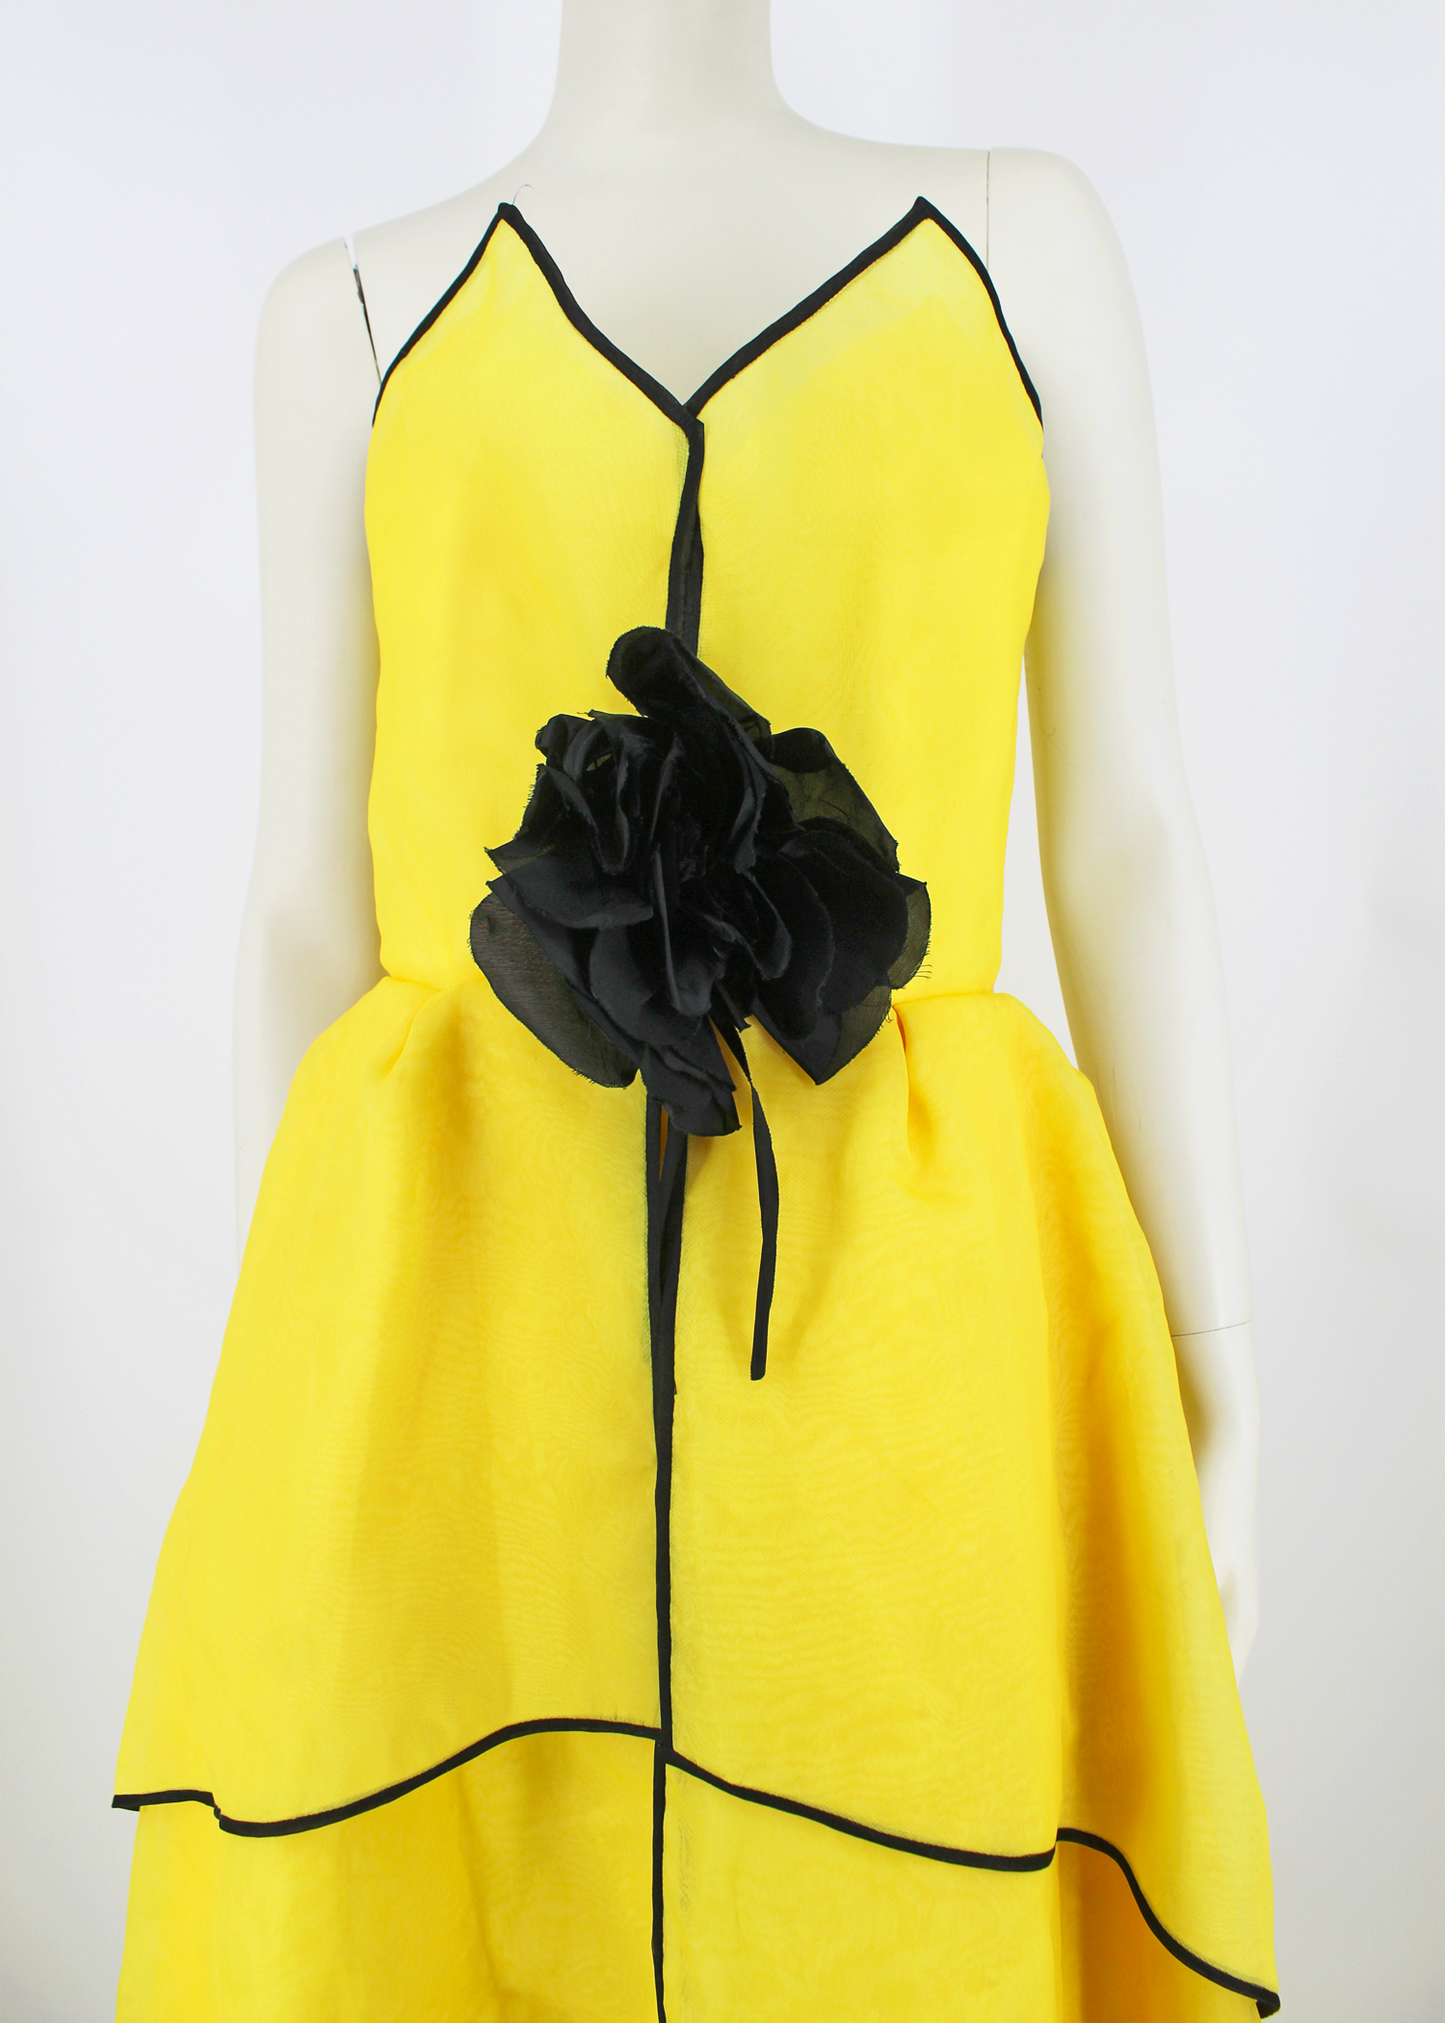 An absolutely breathtaking Victor Costa gown from the 1960s featuring layers of bright yellow organza, an architectural bodice, black piping along the hem of every layer of the dresses skirt and neckline, and an oversized black flower embellishment at front. Slightly higher in the front than in the back.